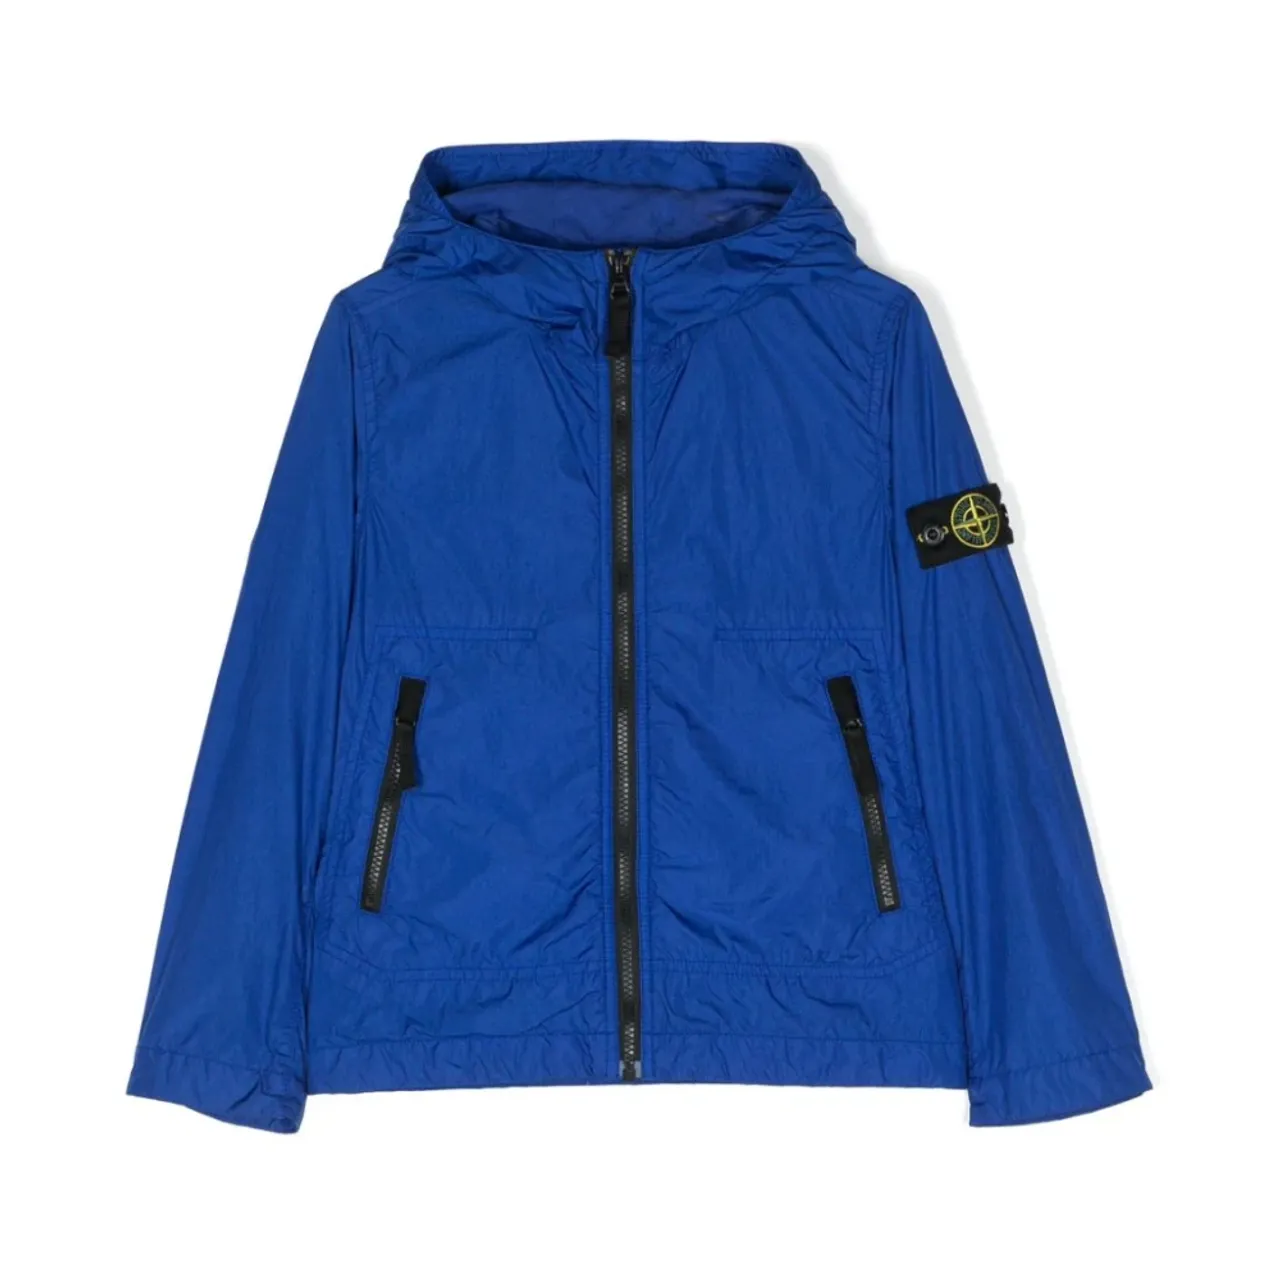 Stone Island , Blue Kids Jacket with Hood and Zipper Fastening ,Blue male, Sizes: